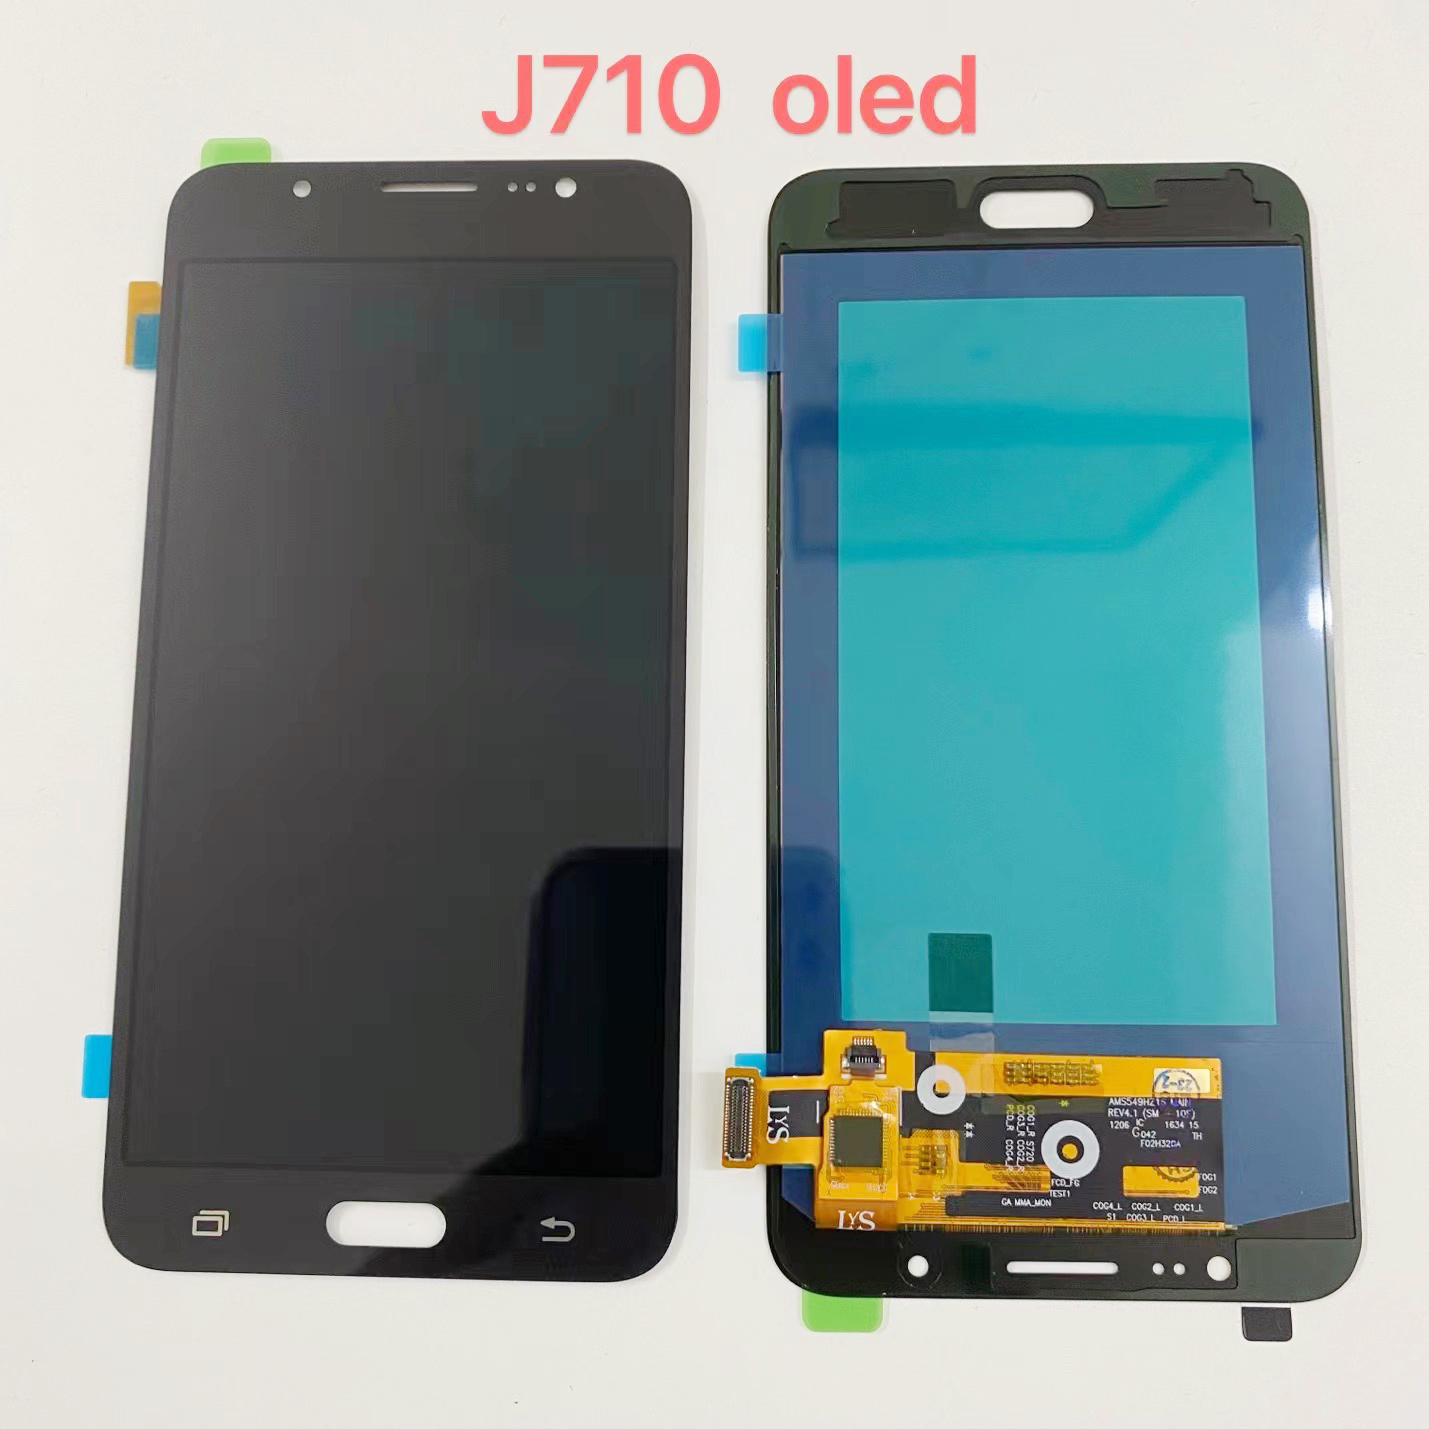 For Samsung J710 Oled Lcd Screen display and Lcd Screen replacement